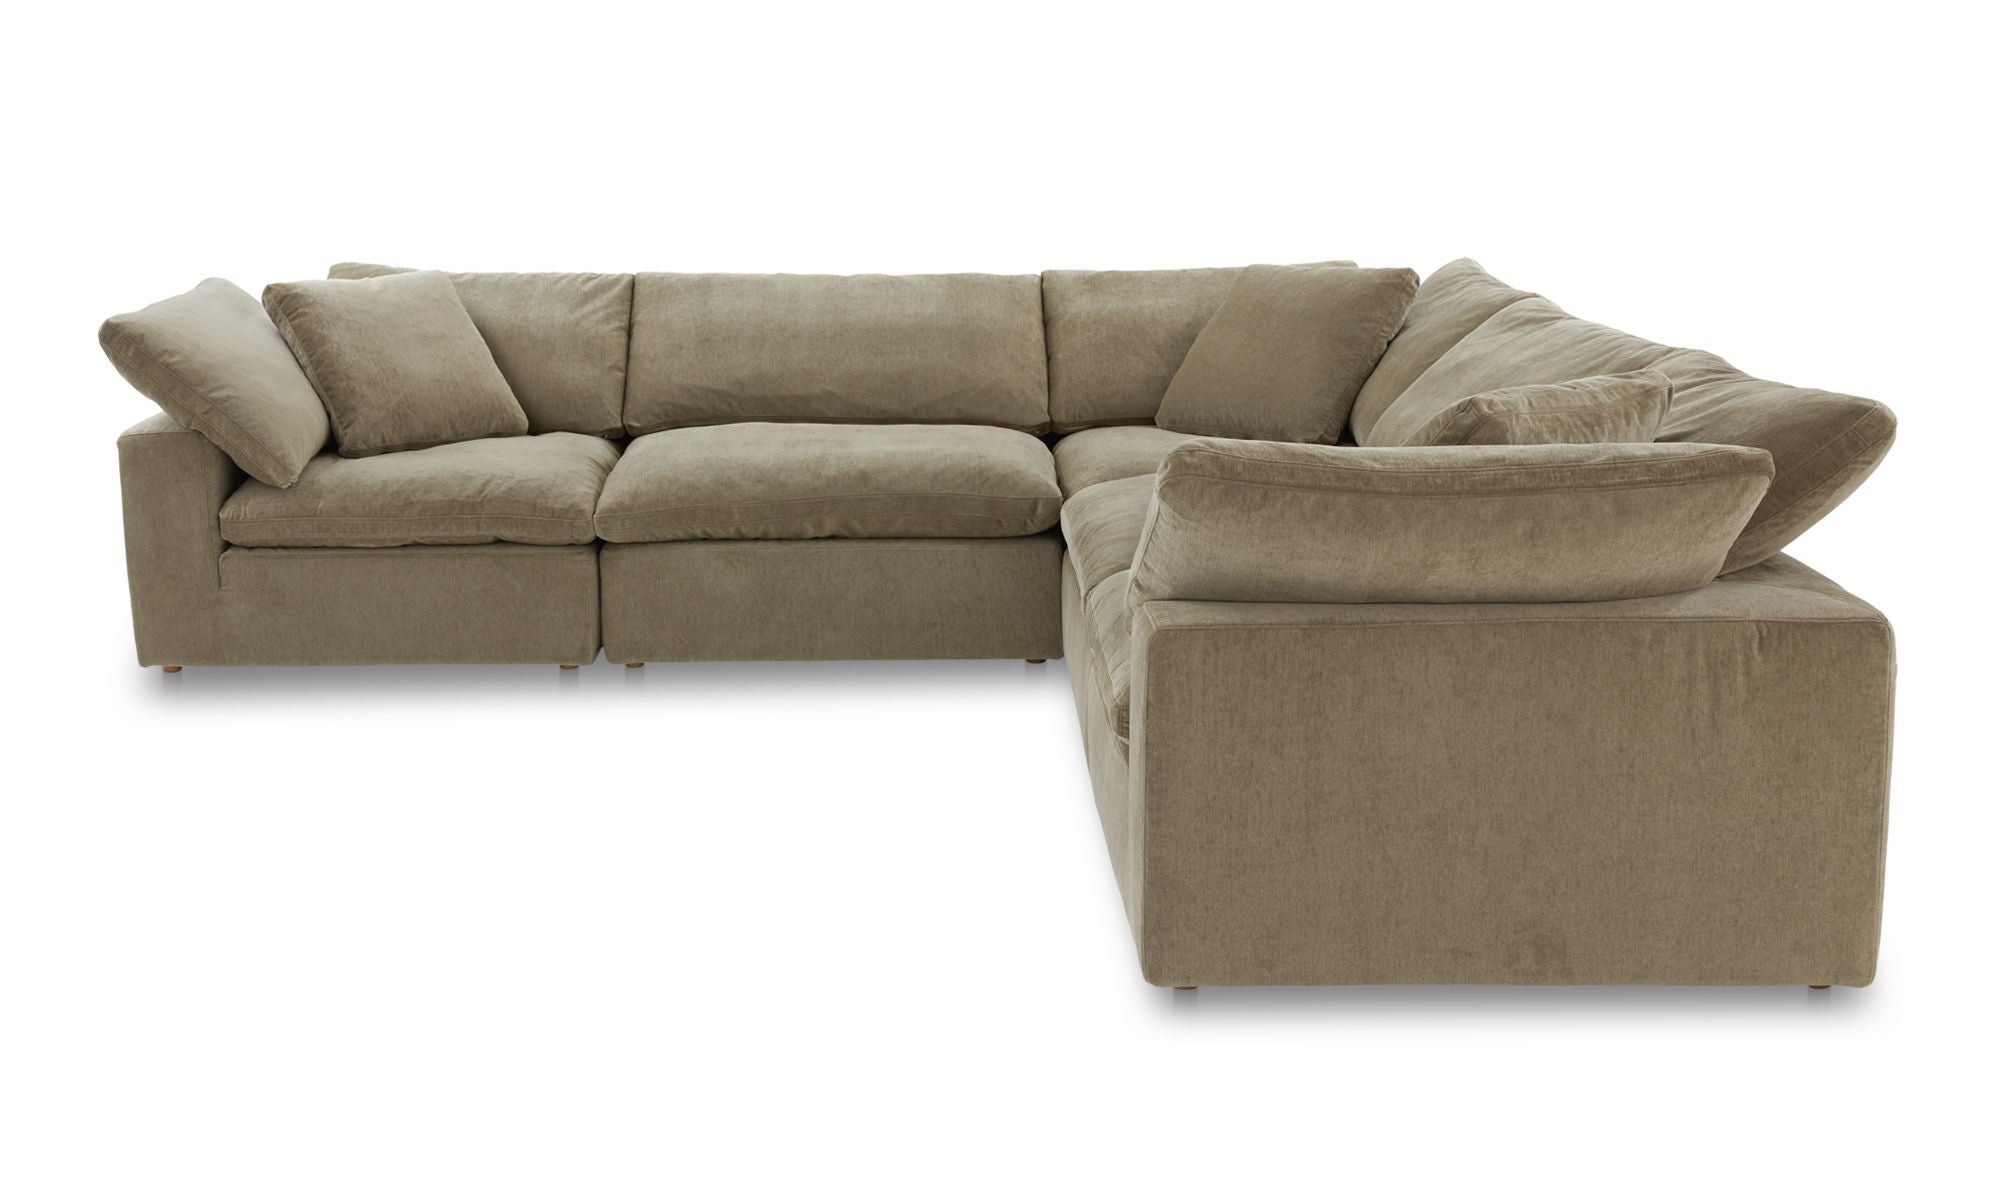 Terra Classic Desert Sage Performance Modular Sectional - Scandinavian Style-Stationary Sectionals-American Furniture Outlet